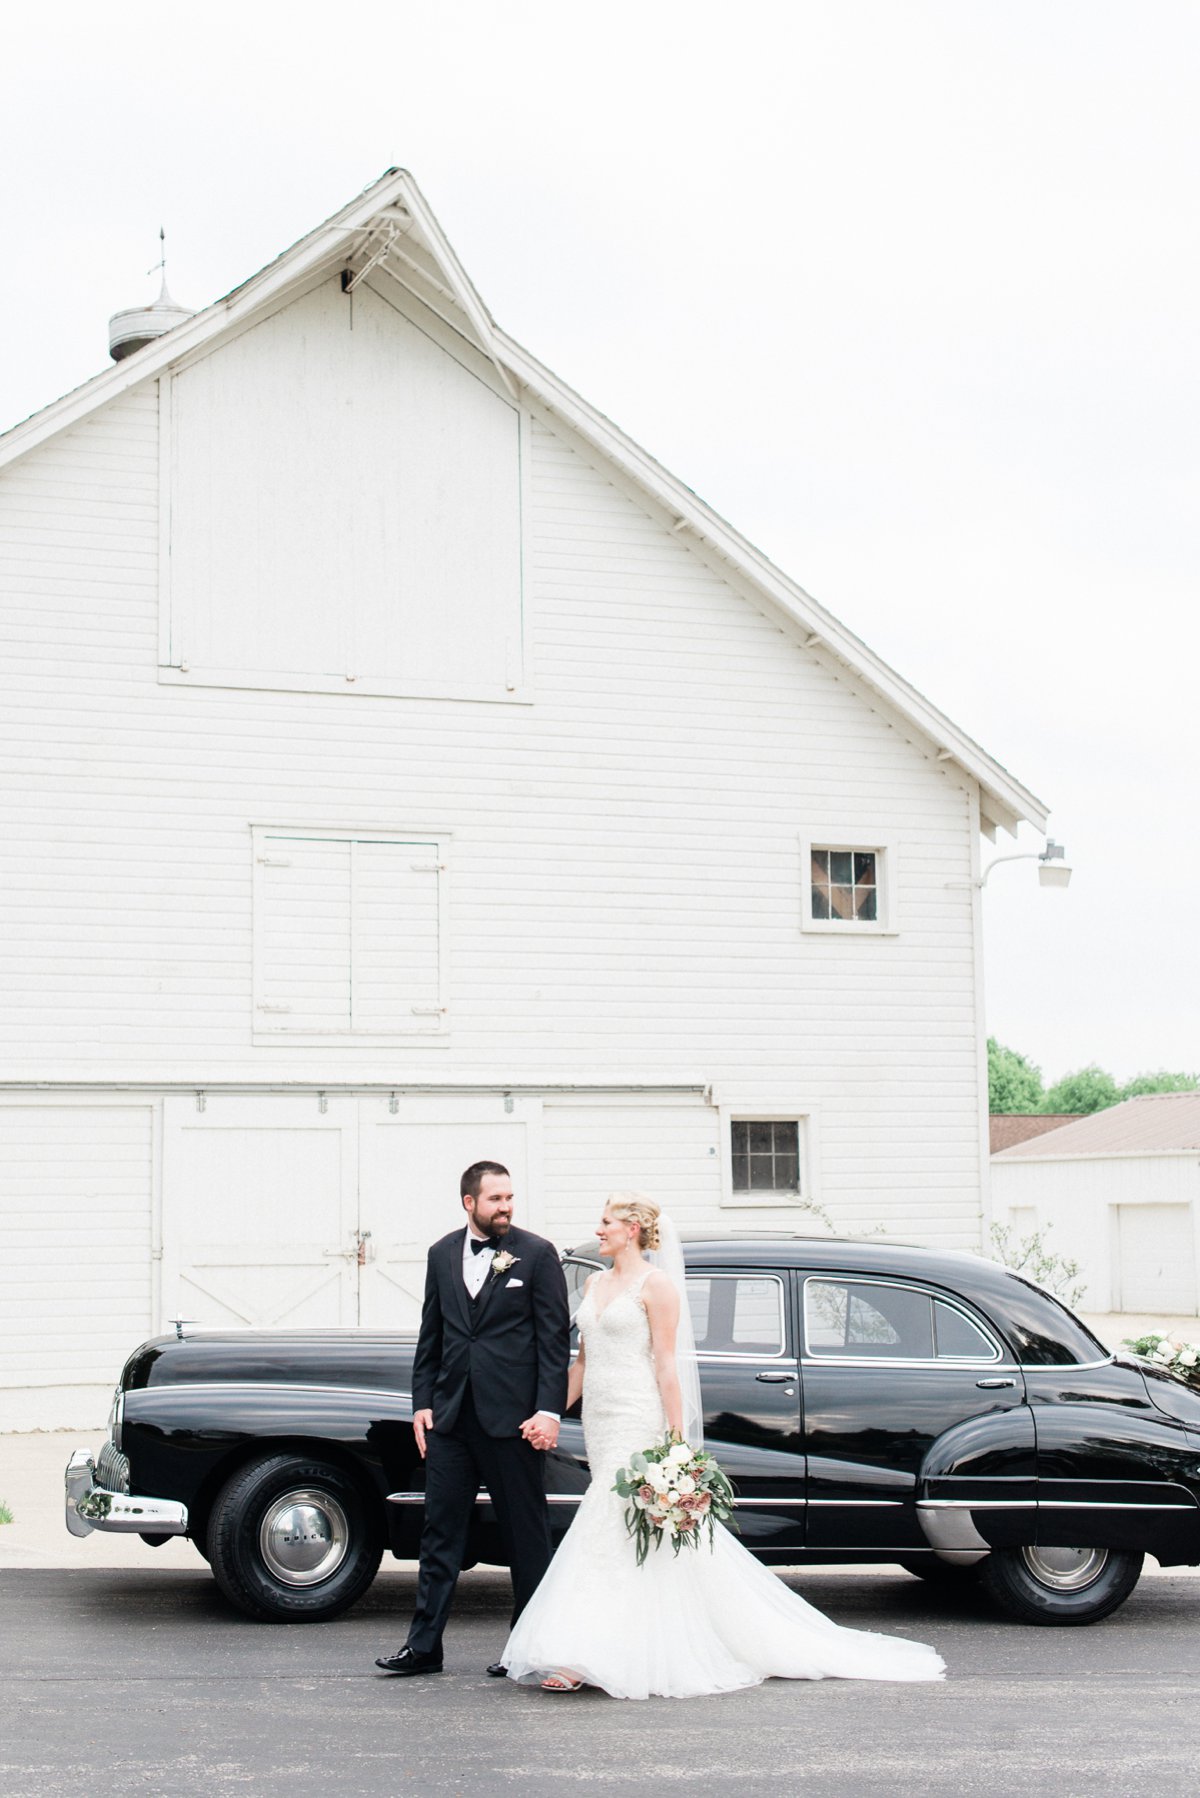 Where to take engagement + wedding photos in Chicago Suburbs - Danada House